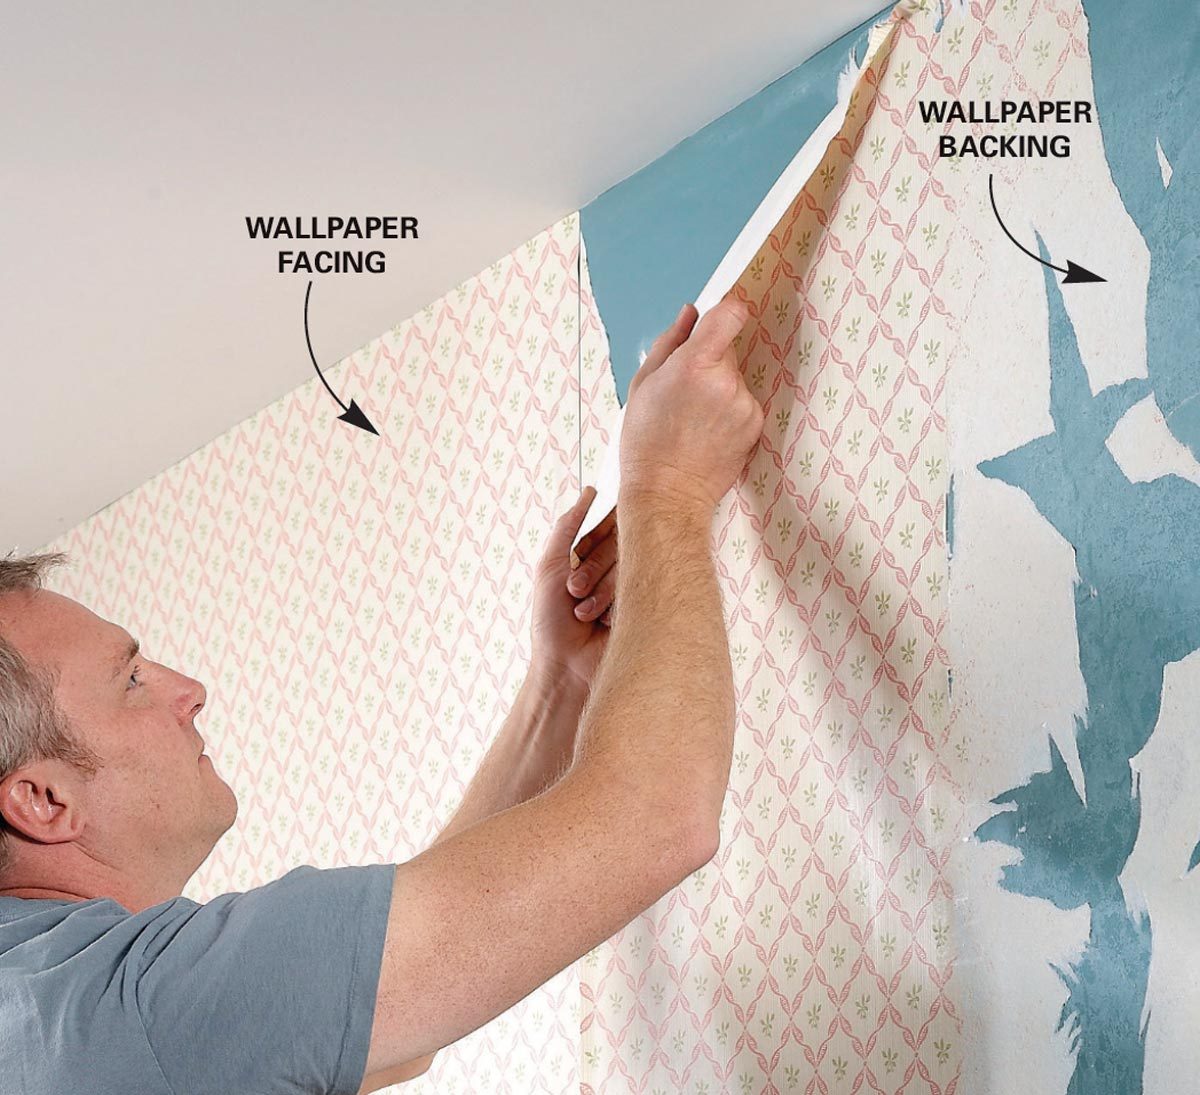 How to Remove Wallpaper (The Easiest Way Step by Step!) - Driven